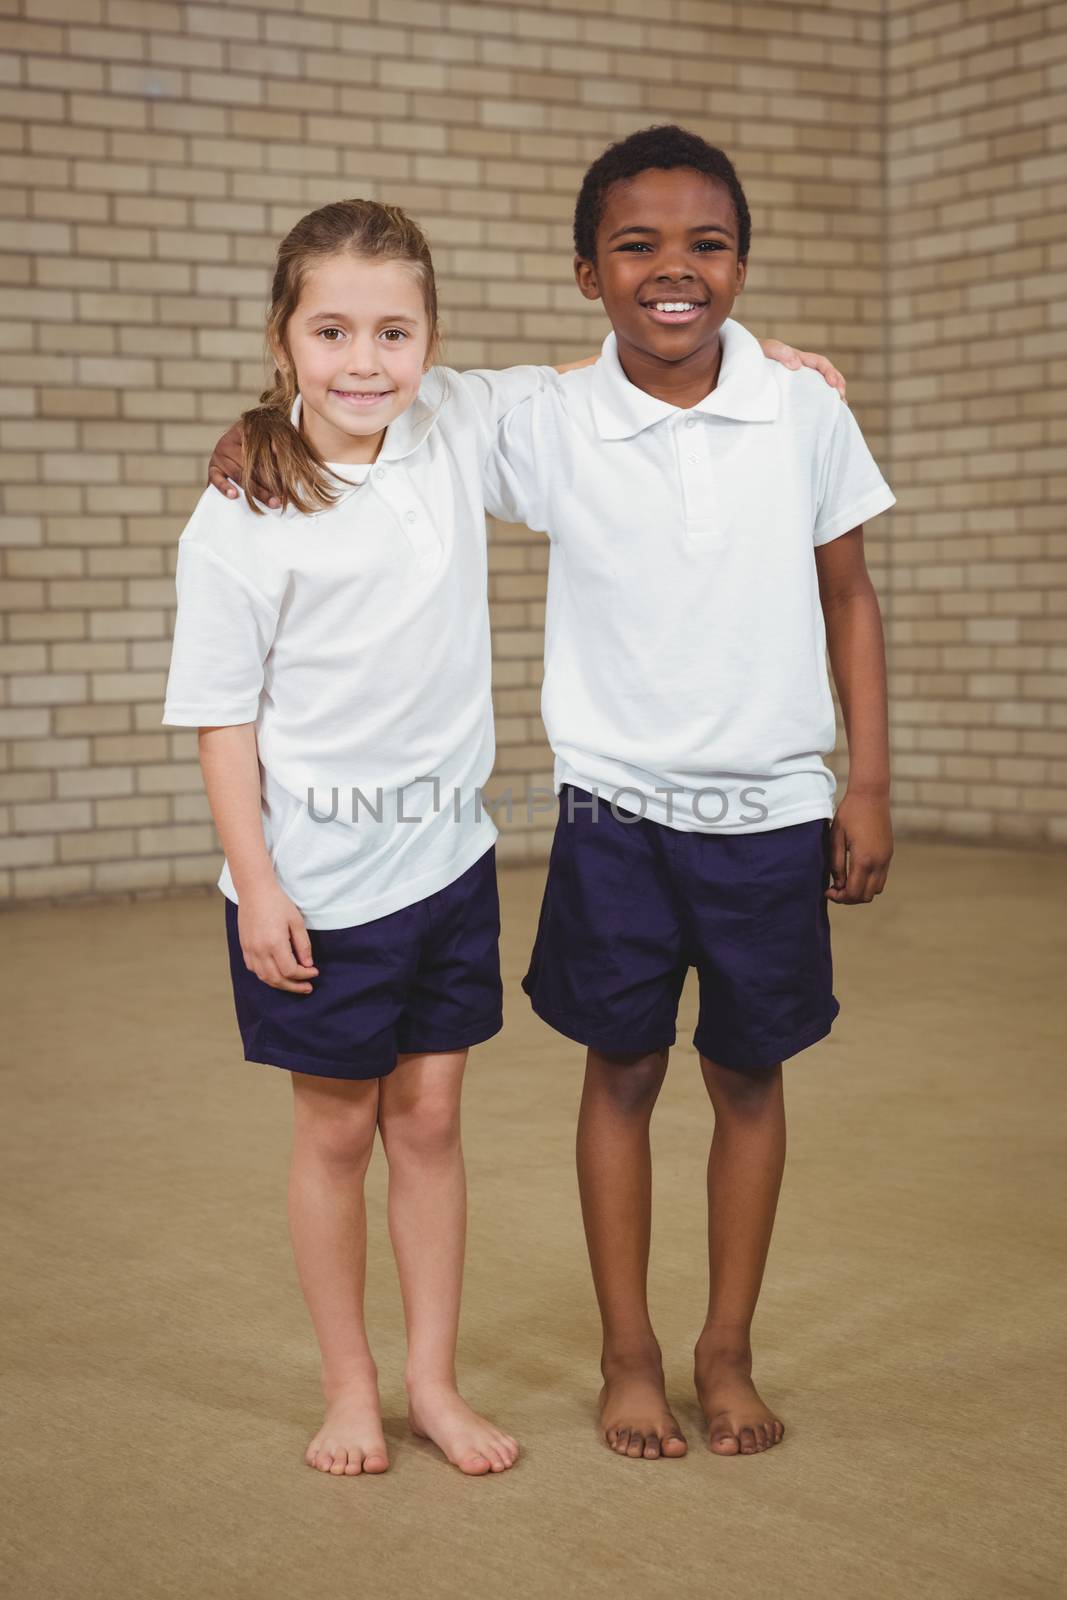 Pupils smiling with arms around each other by Wavebreakmedia